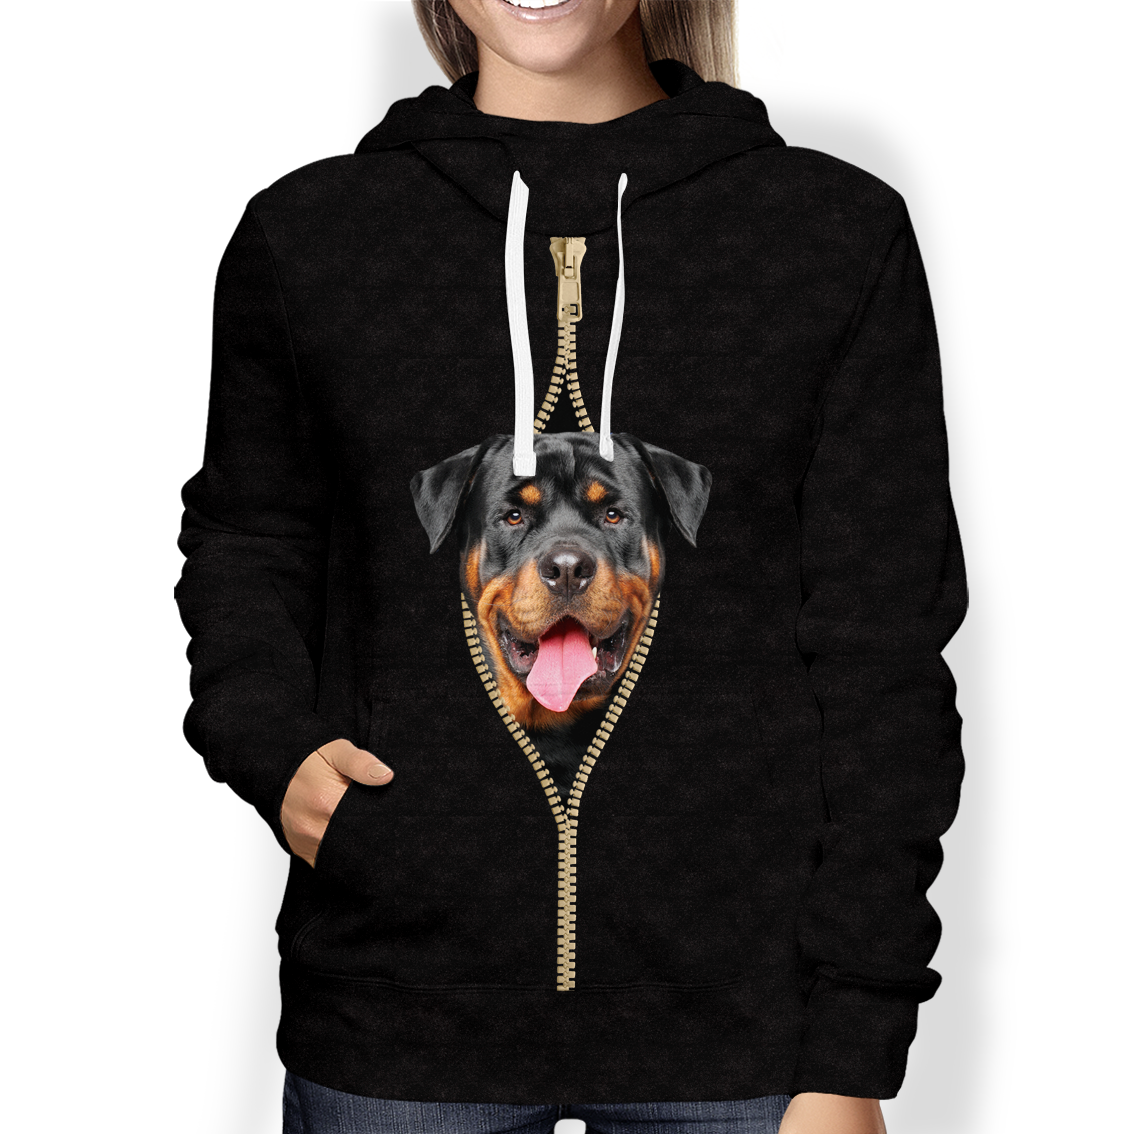 I'm With You - Rottweiler Hoodie V2